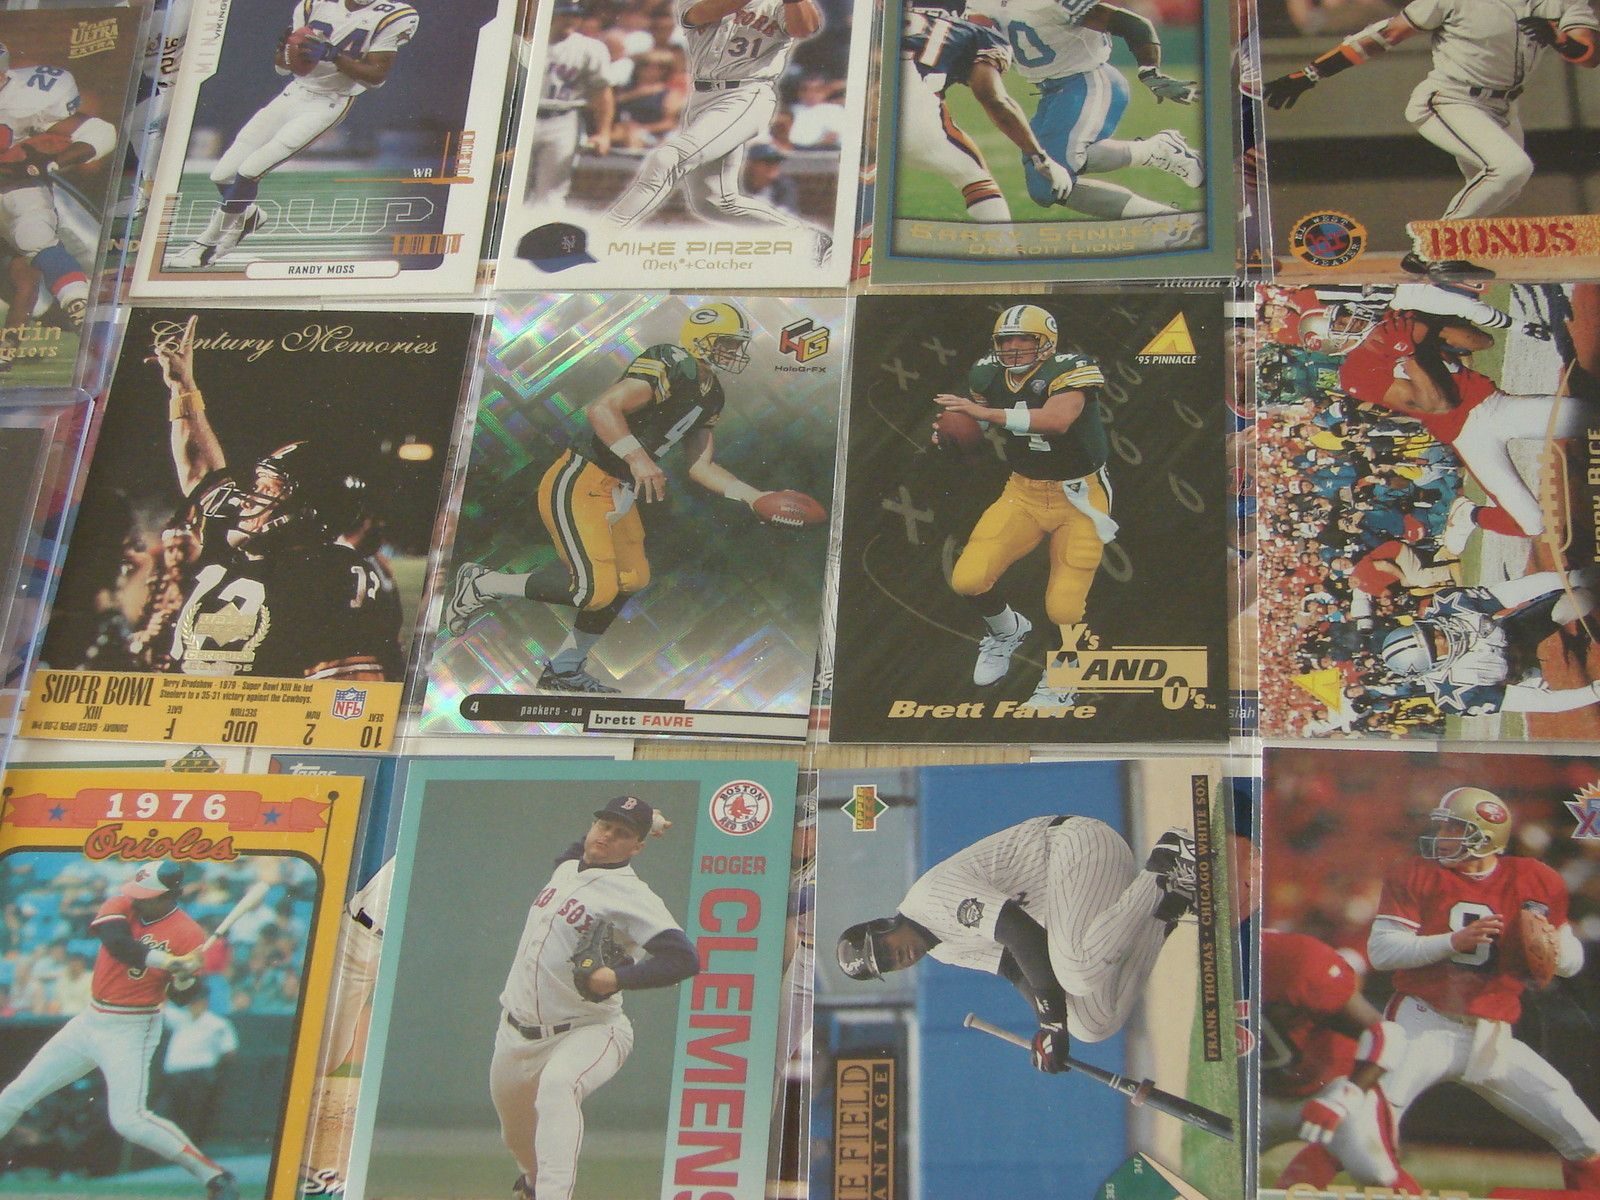  FAVRE, TERRY BRADSHAW, JERRY RICE, BARRY SANDERS, MOSS AND MORE